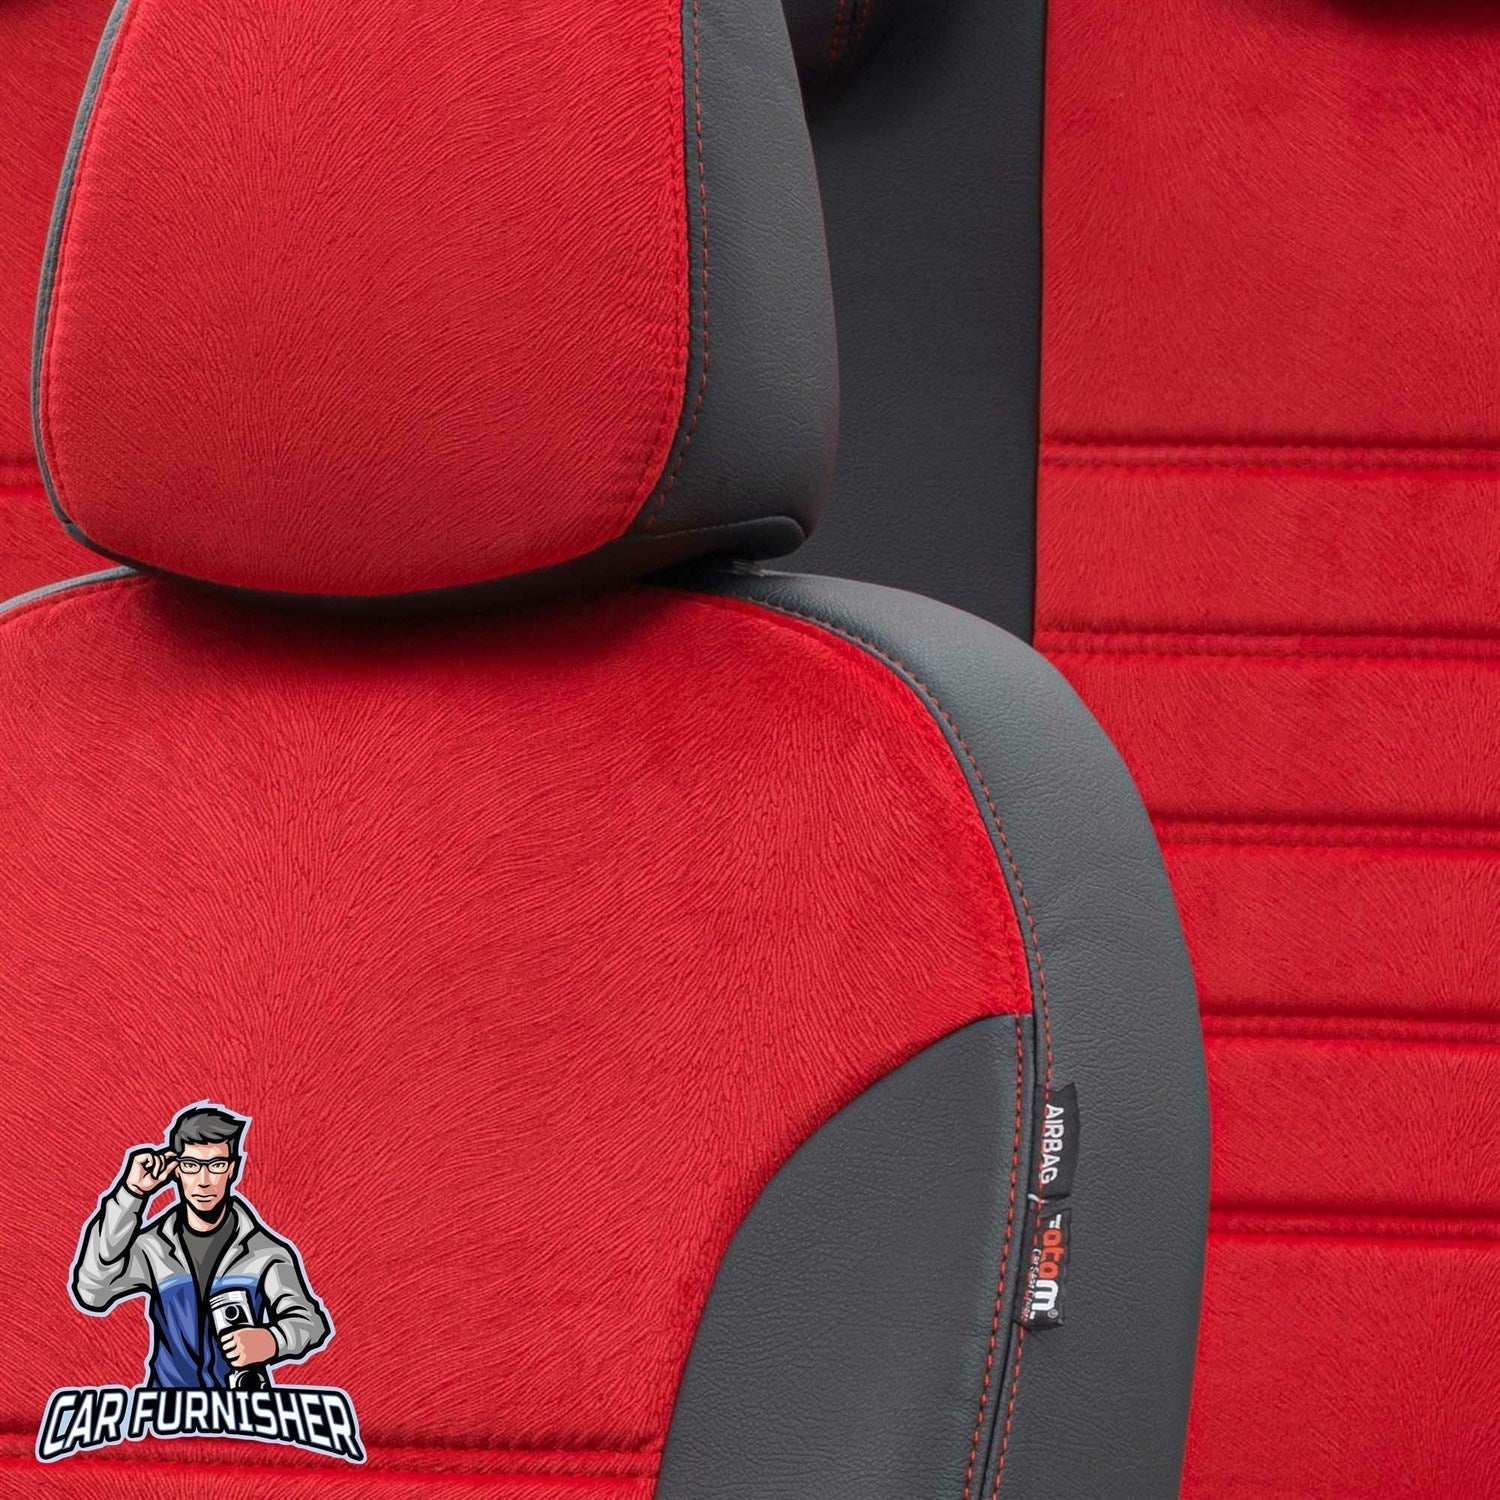 Renault Premium Seat Cover London Foal Feather Design Red Front Seats (2 Seats + Handrest + Headrests) Leather & Foal Feather